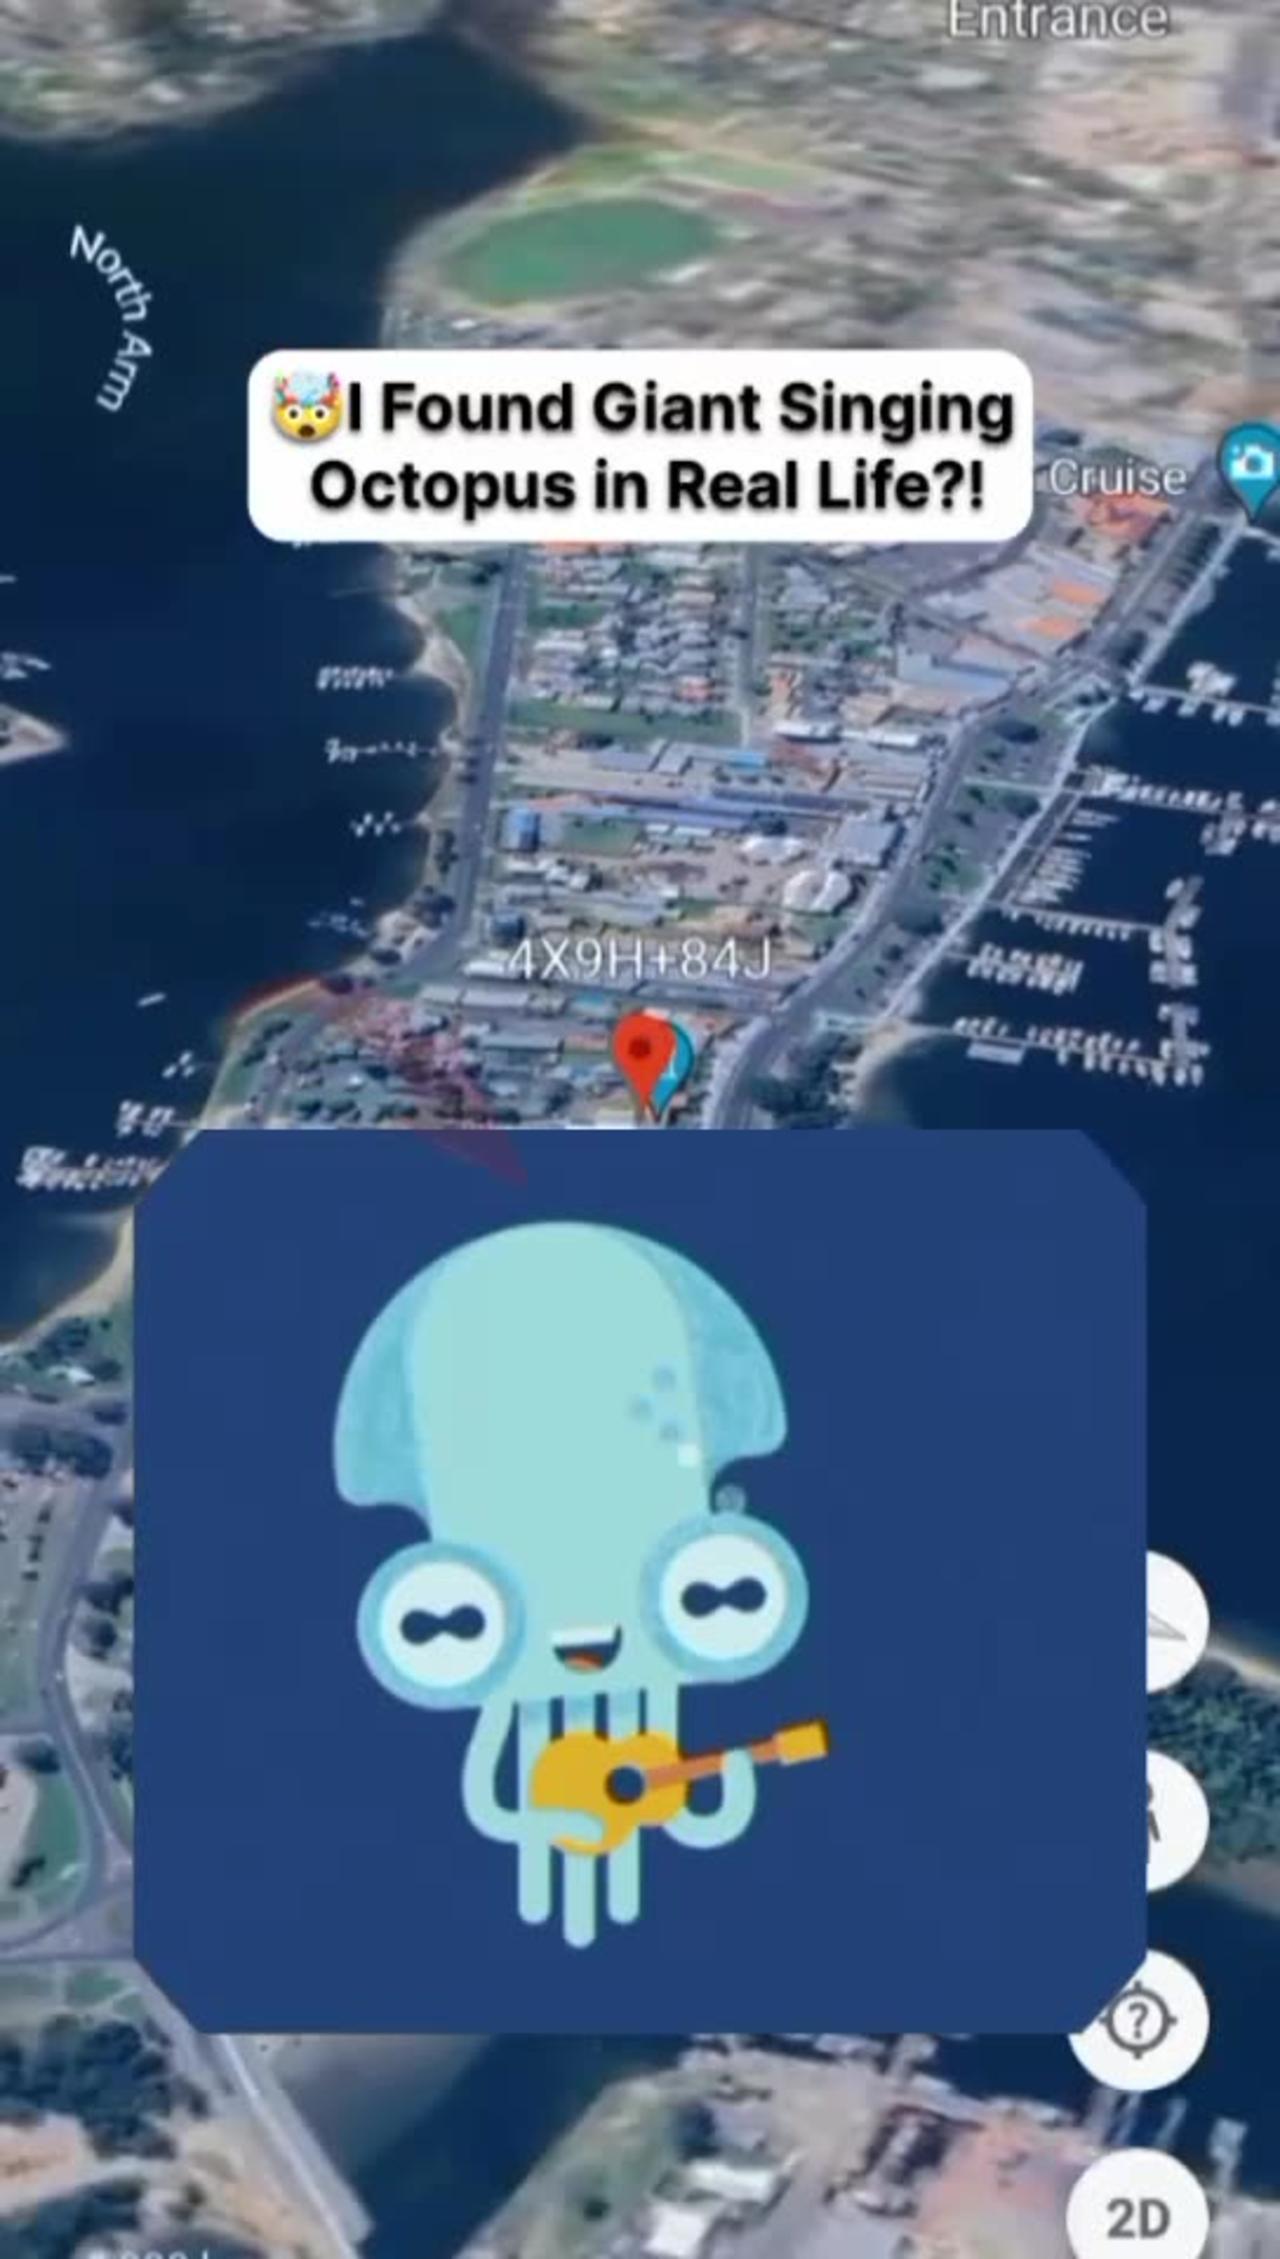 🤯I Found Giant Creepy Singing Octopus in Real Life?! on Google maps & Google Earth#